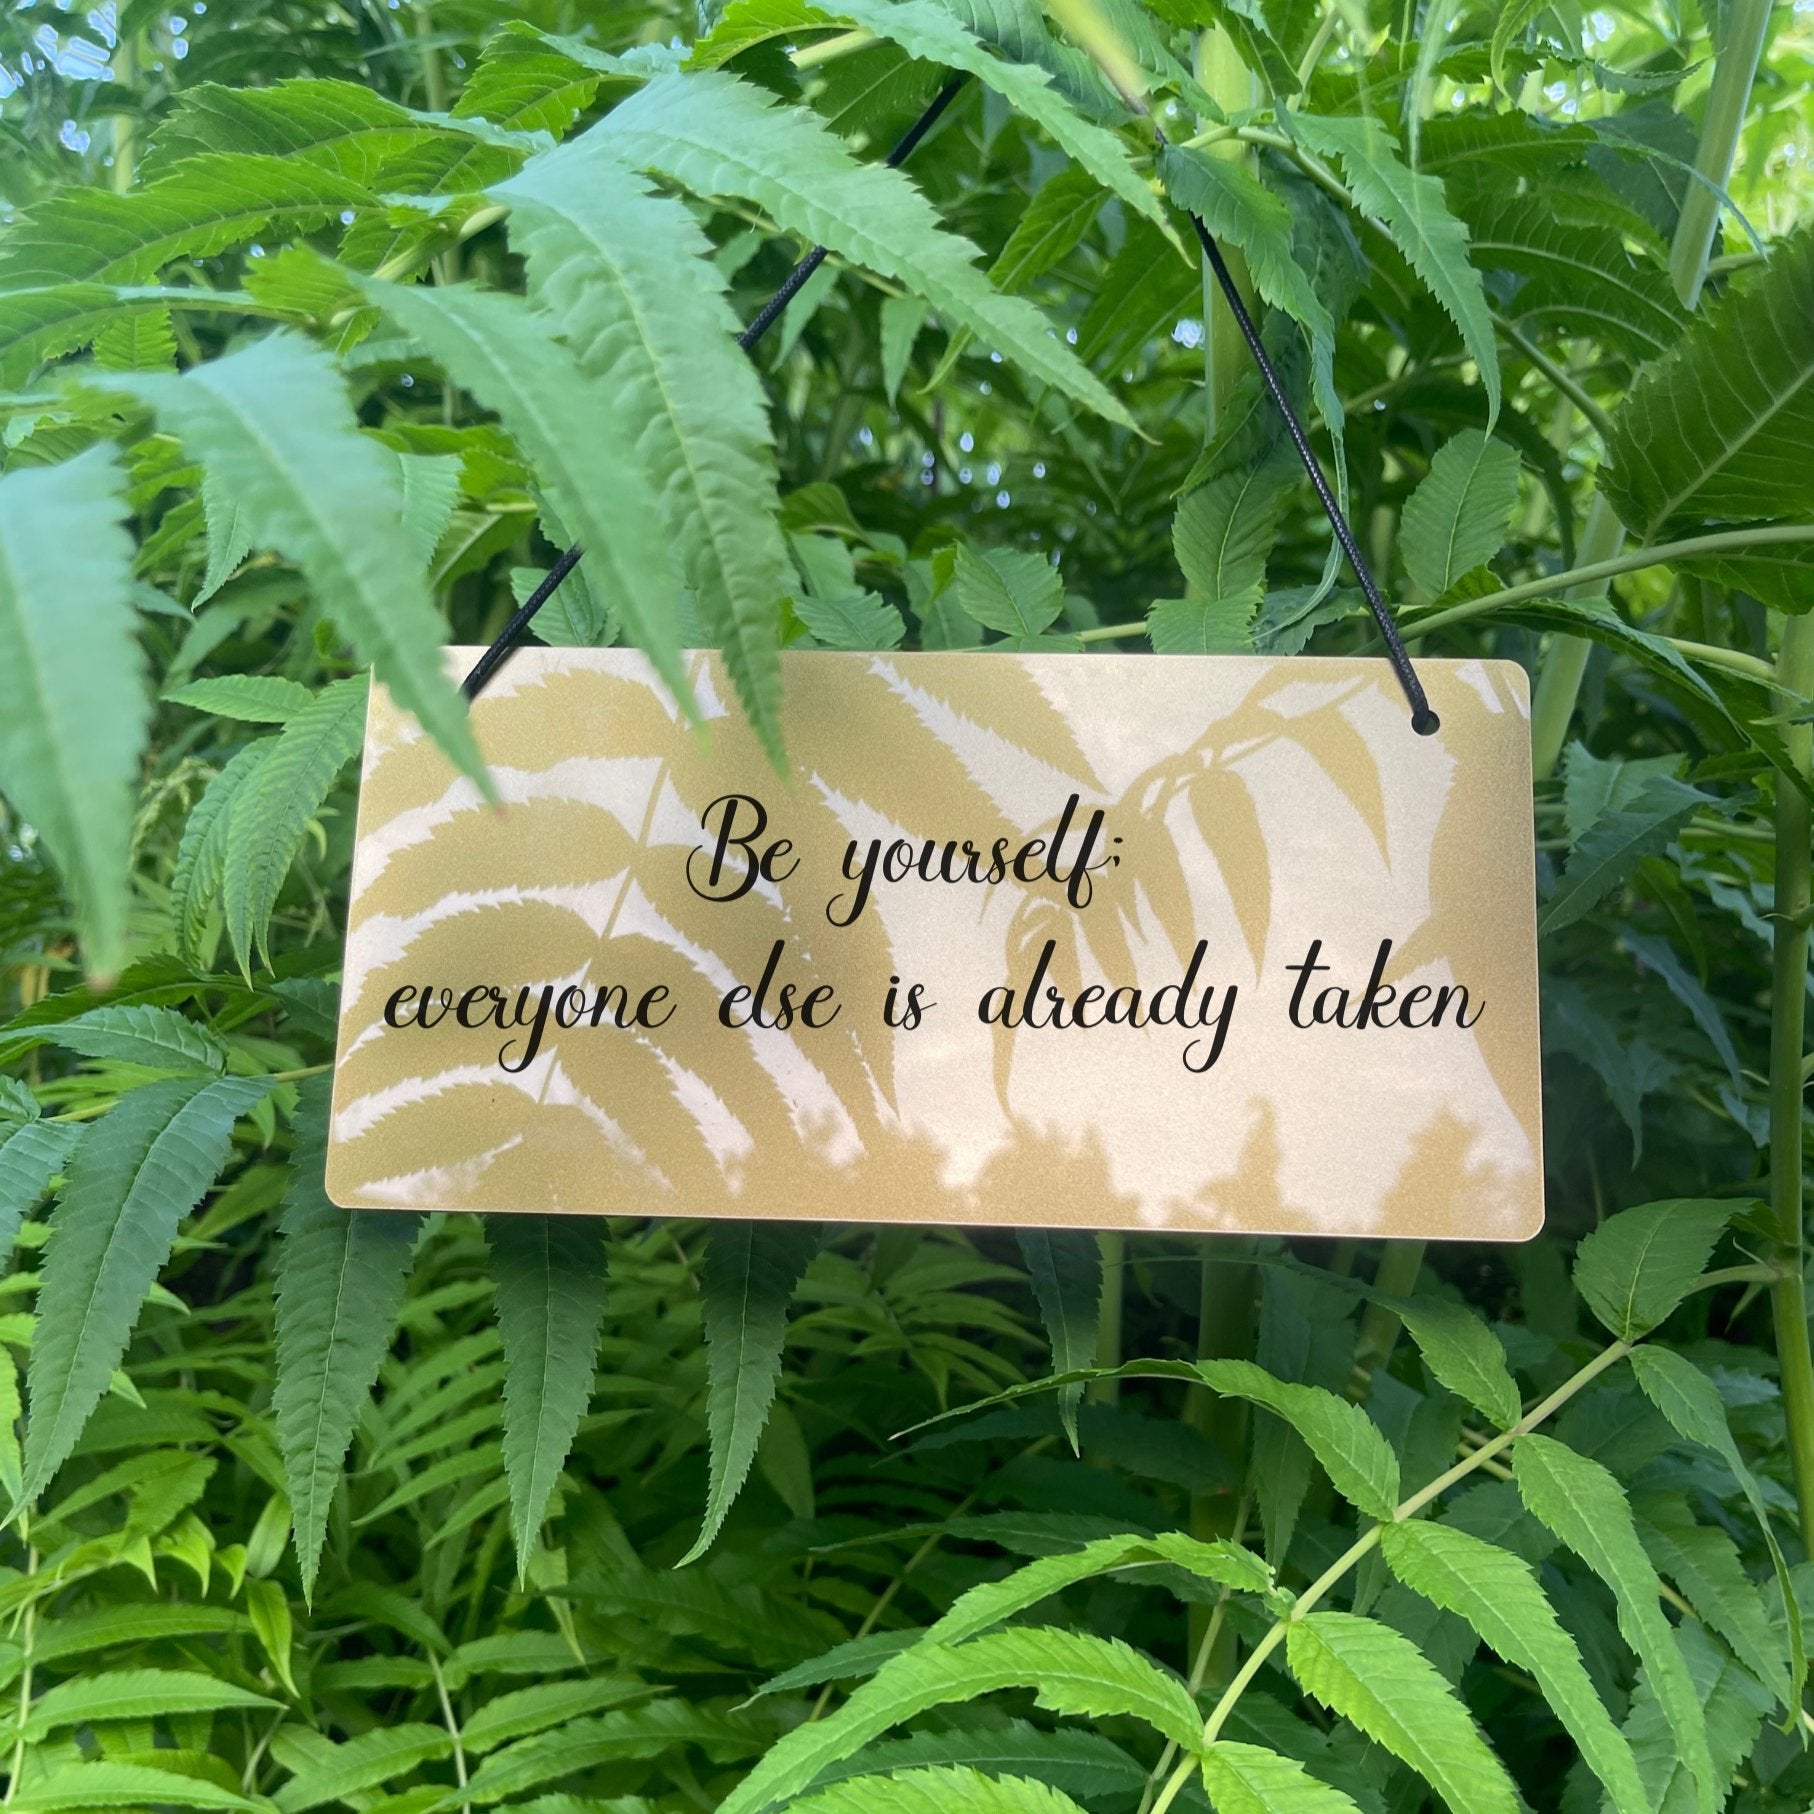 Premium silver or gold acrylic sign with black twine hanging, featuring the quote 'Be yourself; everyone else is already taken.' A stylish addition to home decor and a thoughtful gift option for special occasions.